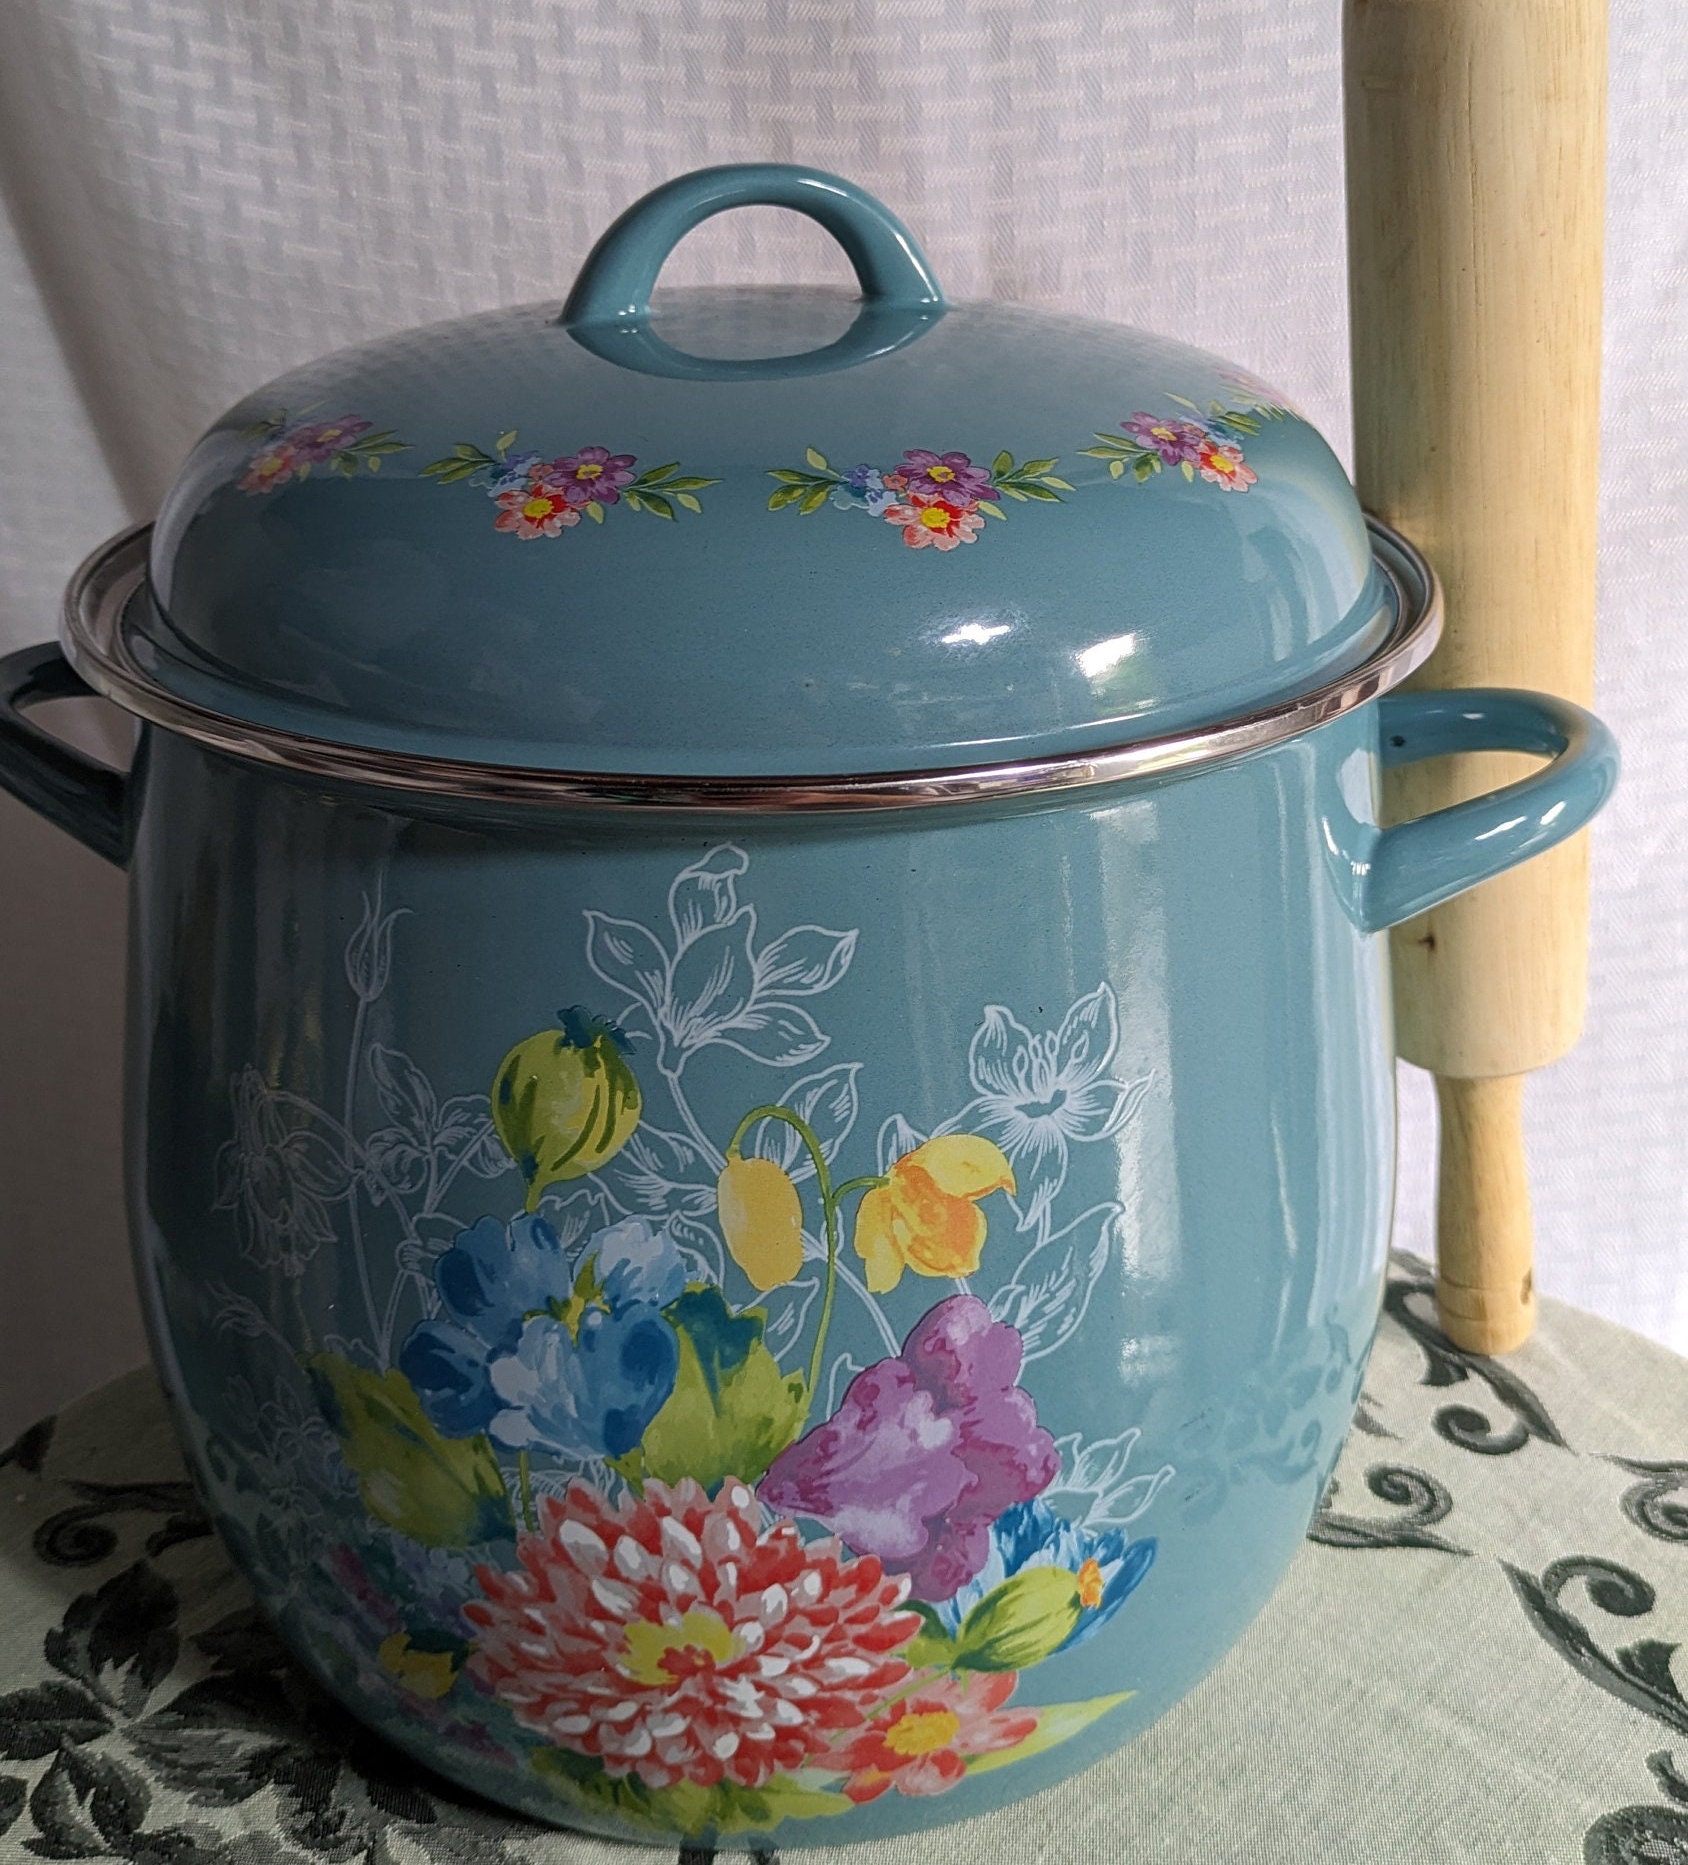 12 Quart Soup Pot Pioneer Woman With Blooming Bouquet in Teal. 